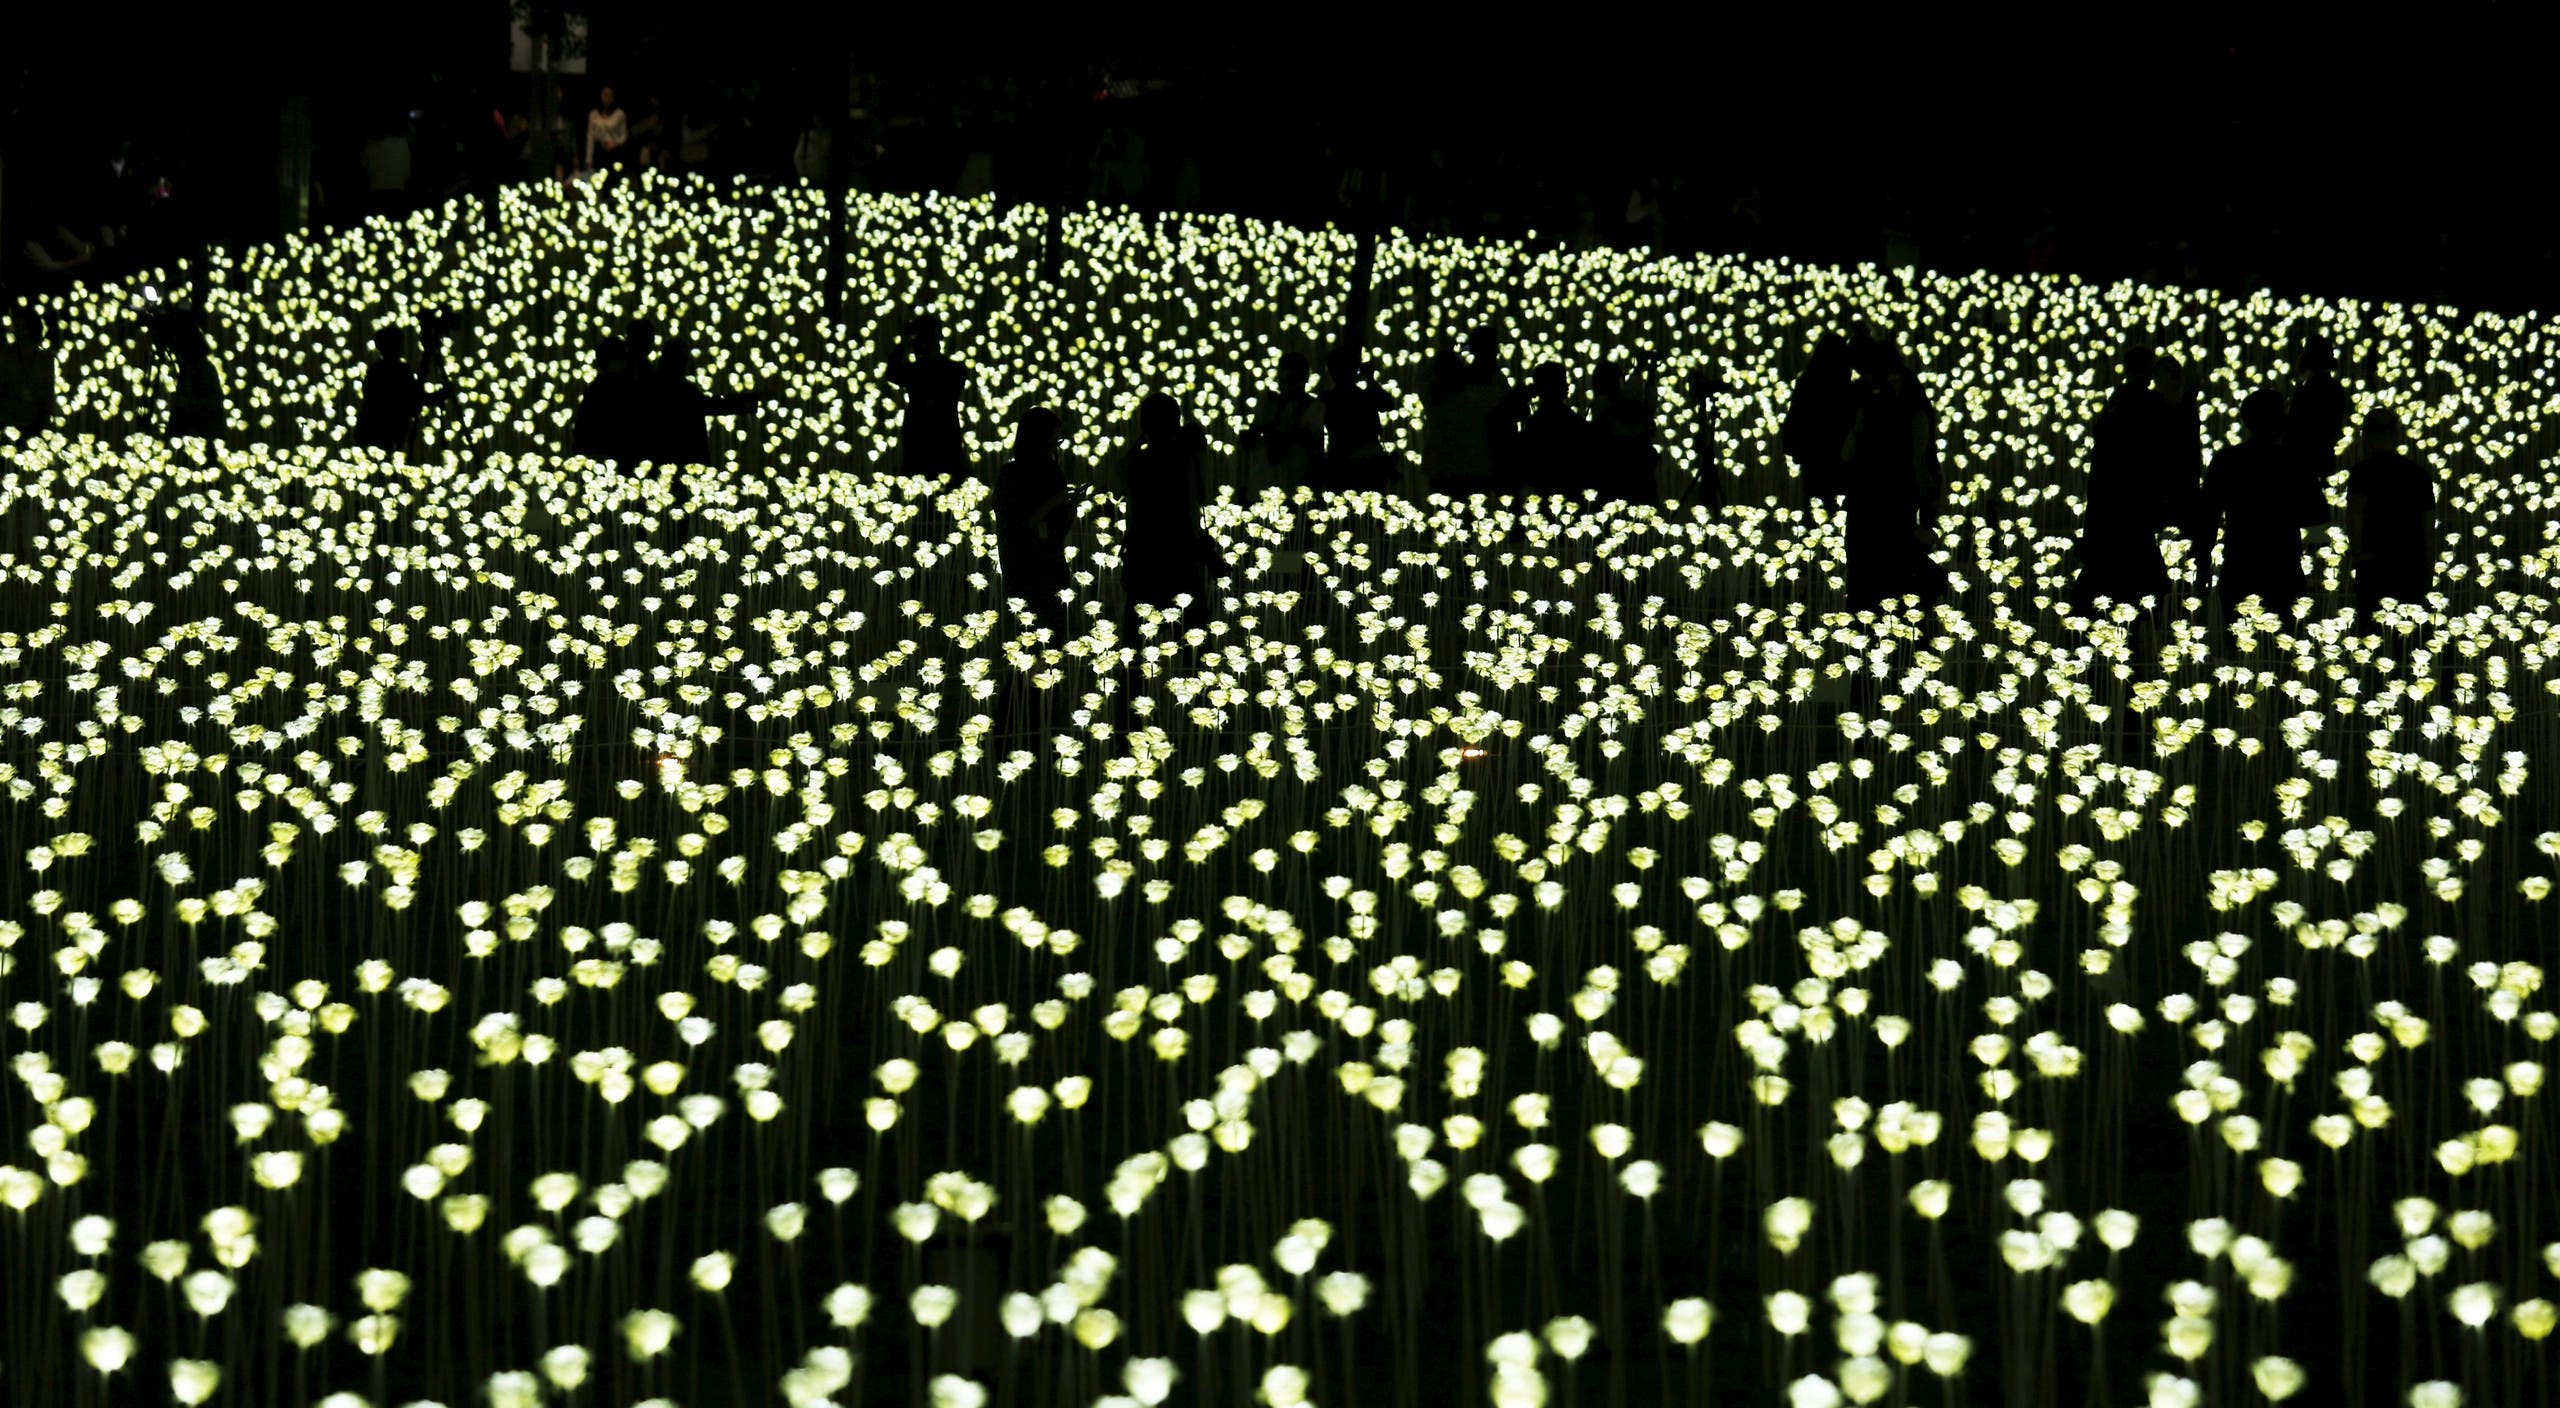 Visitors stand in between illuminated white rose shaped LED lights, numbering a total of 25,000, at Admiralty in Hong Kong, China February 13, 2016.(Reuters)